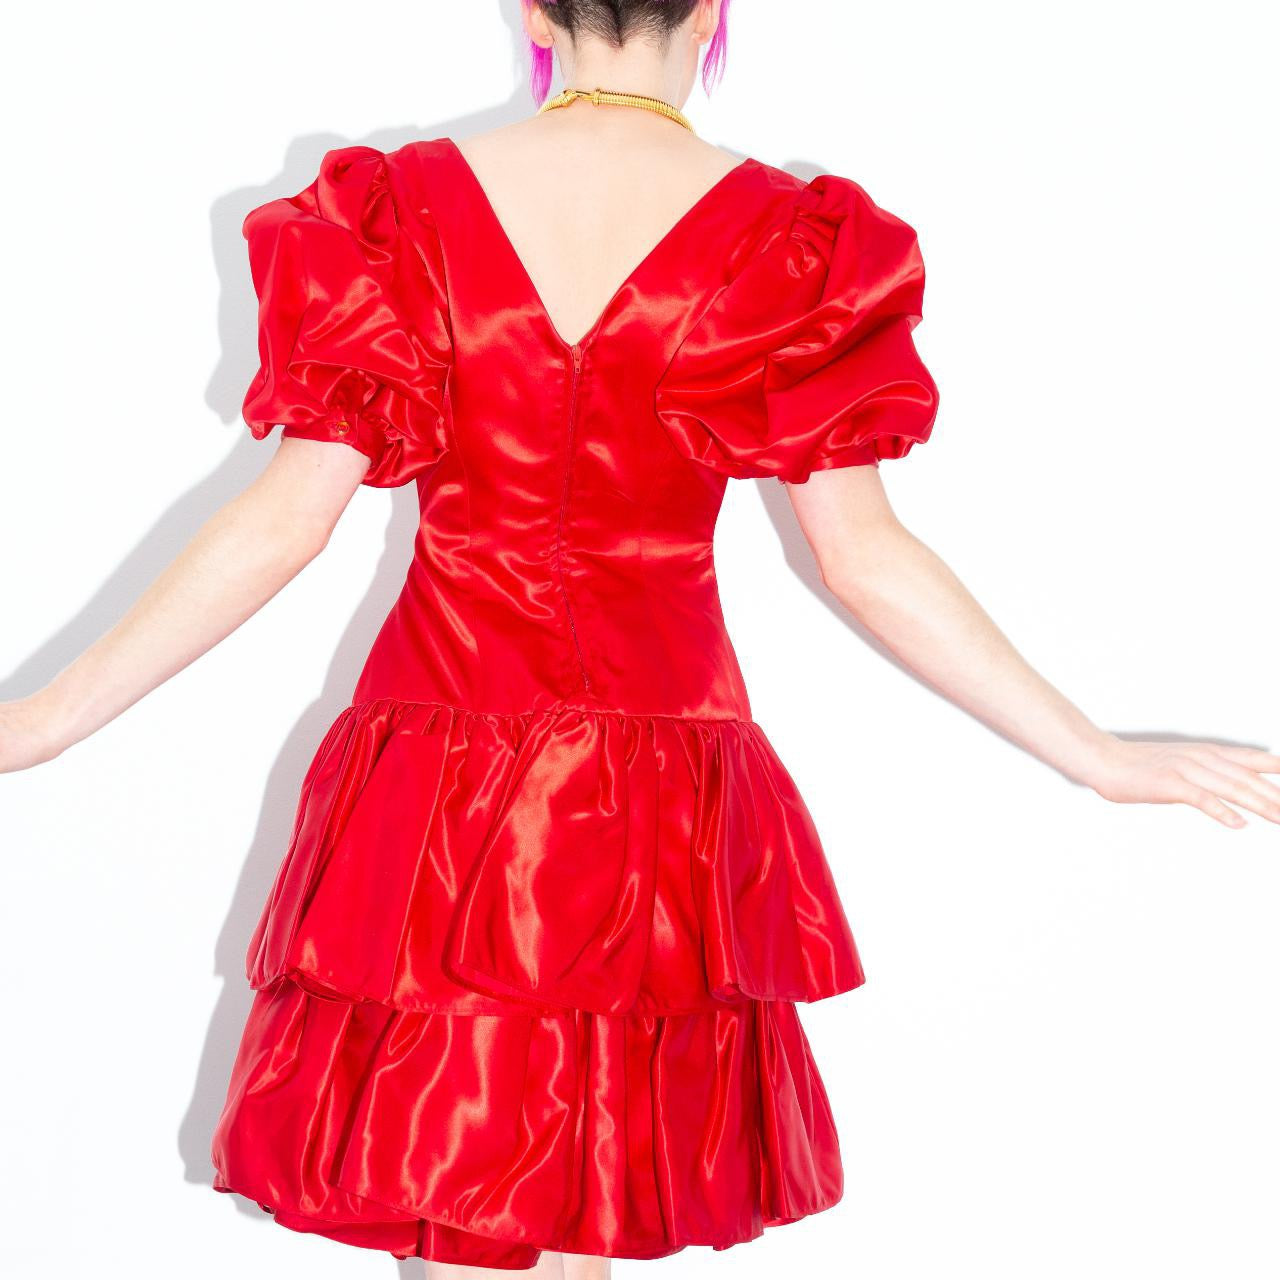 Vintage 90s Poison Candy Apple Red Tiered Ruffle Party Dress